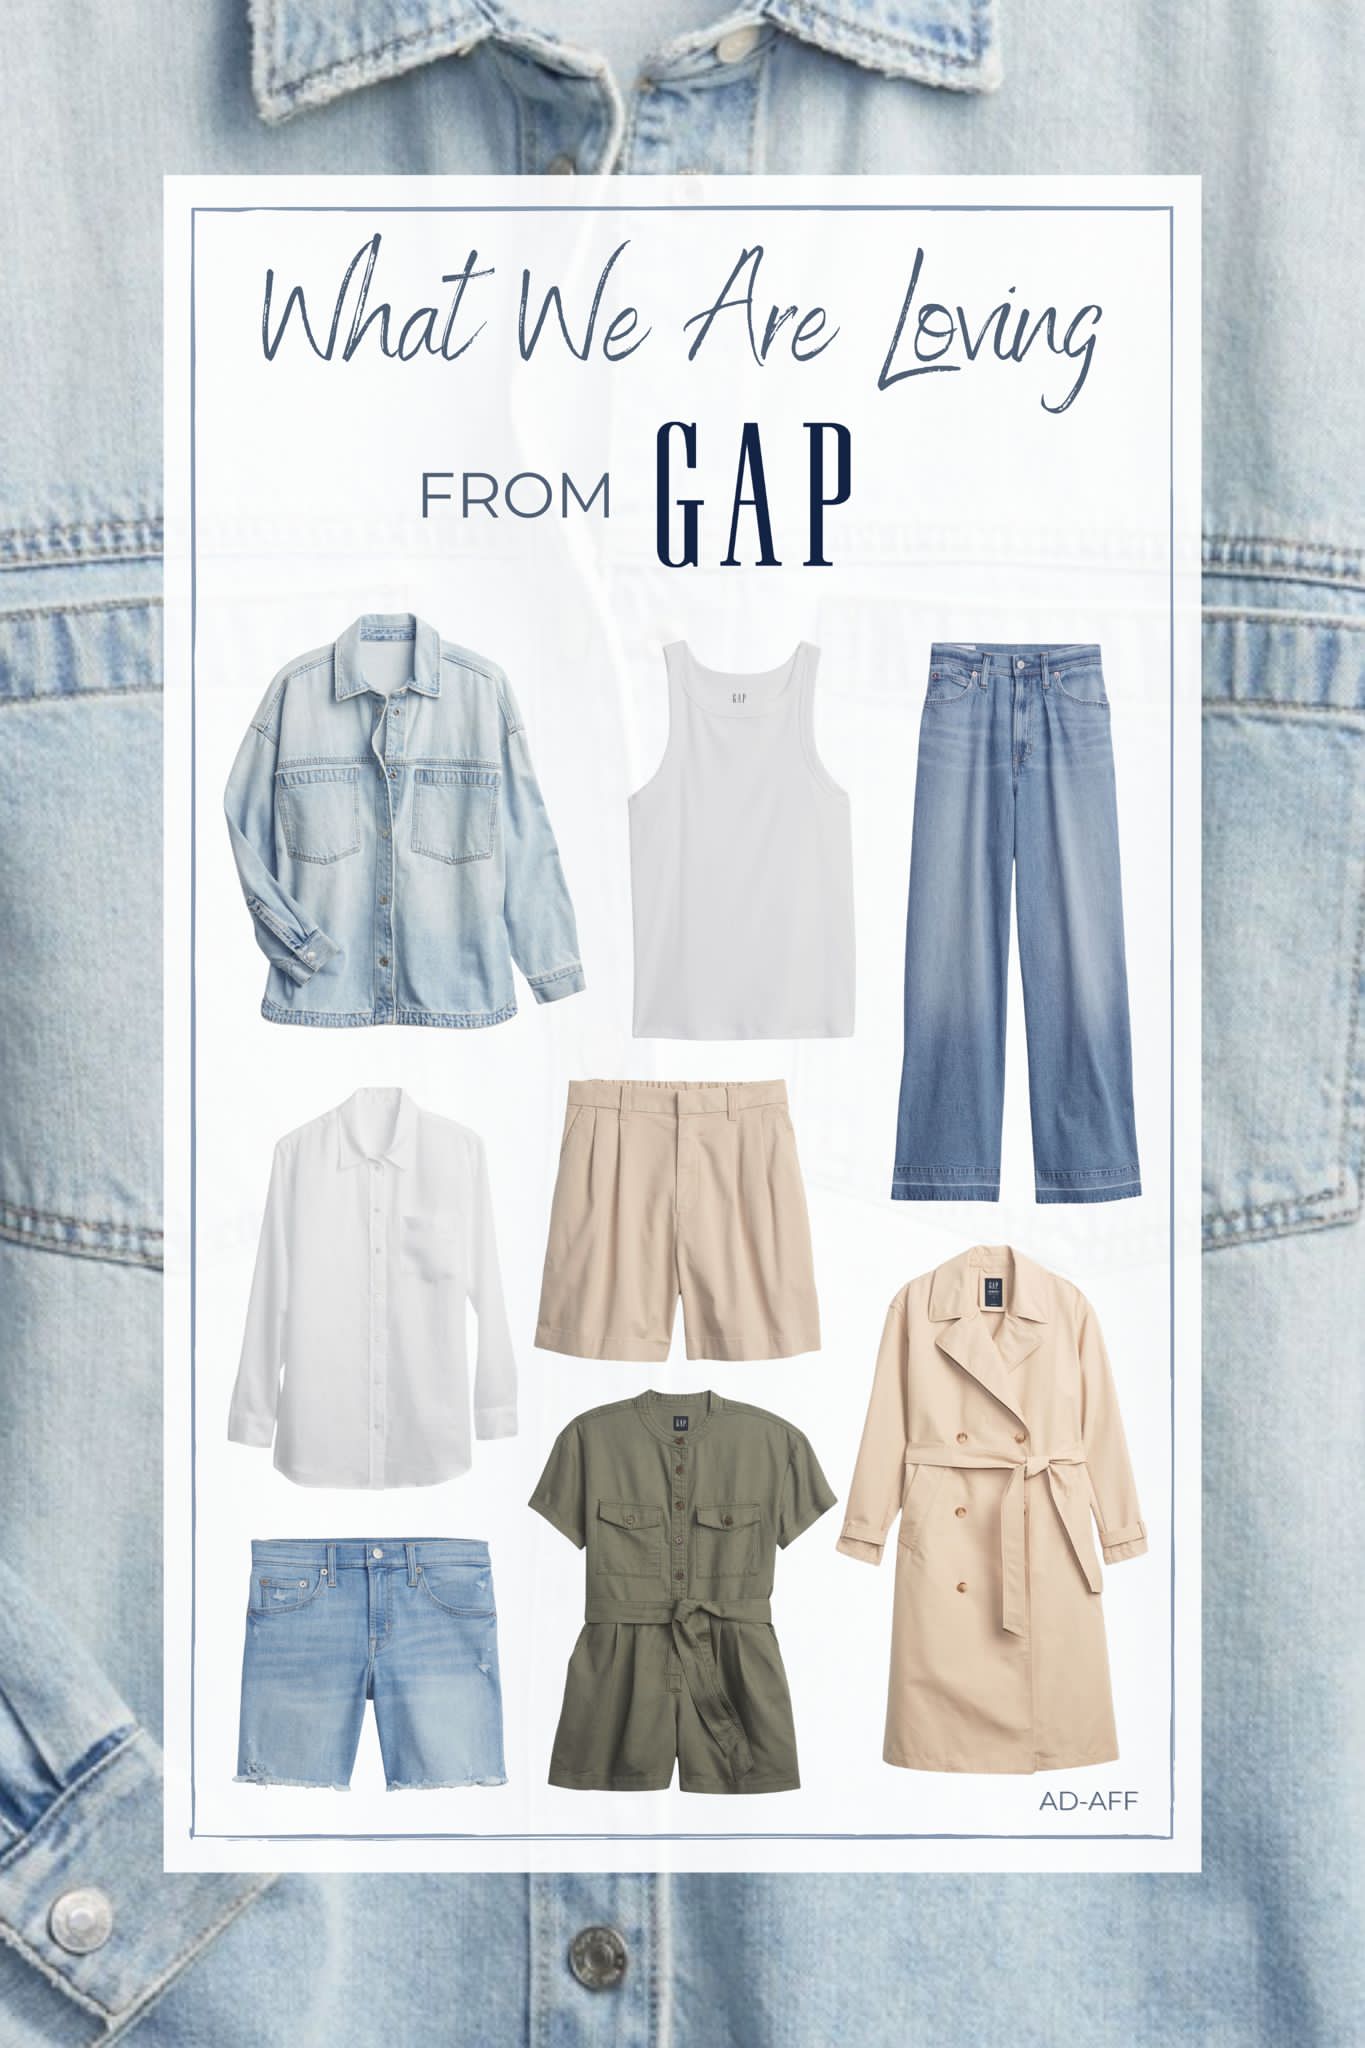 EVERYTHING WE ARE LOVING FROM GAP